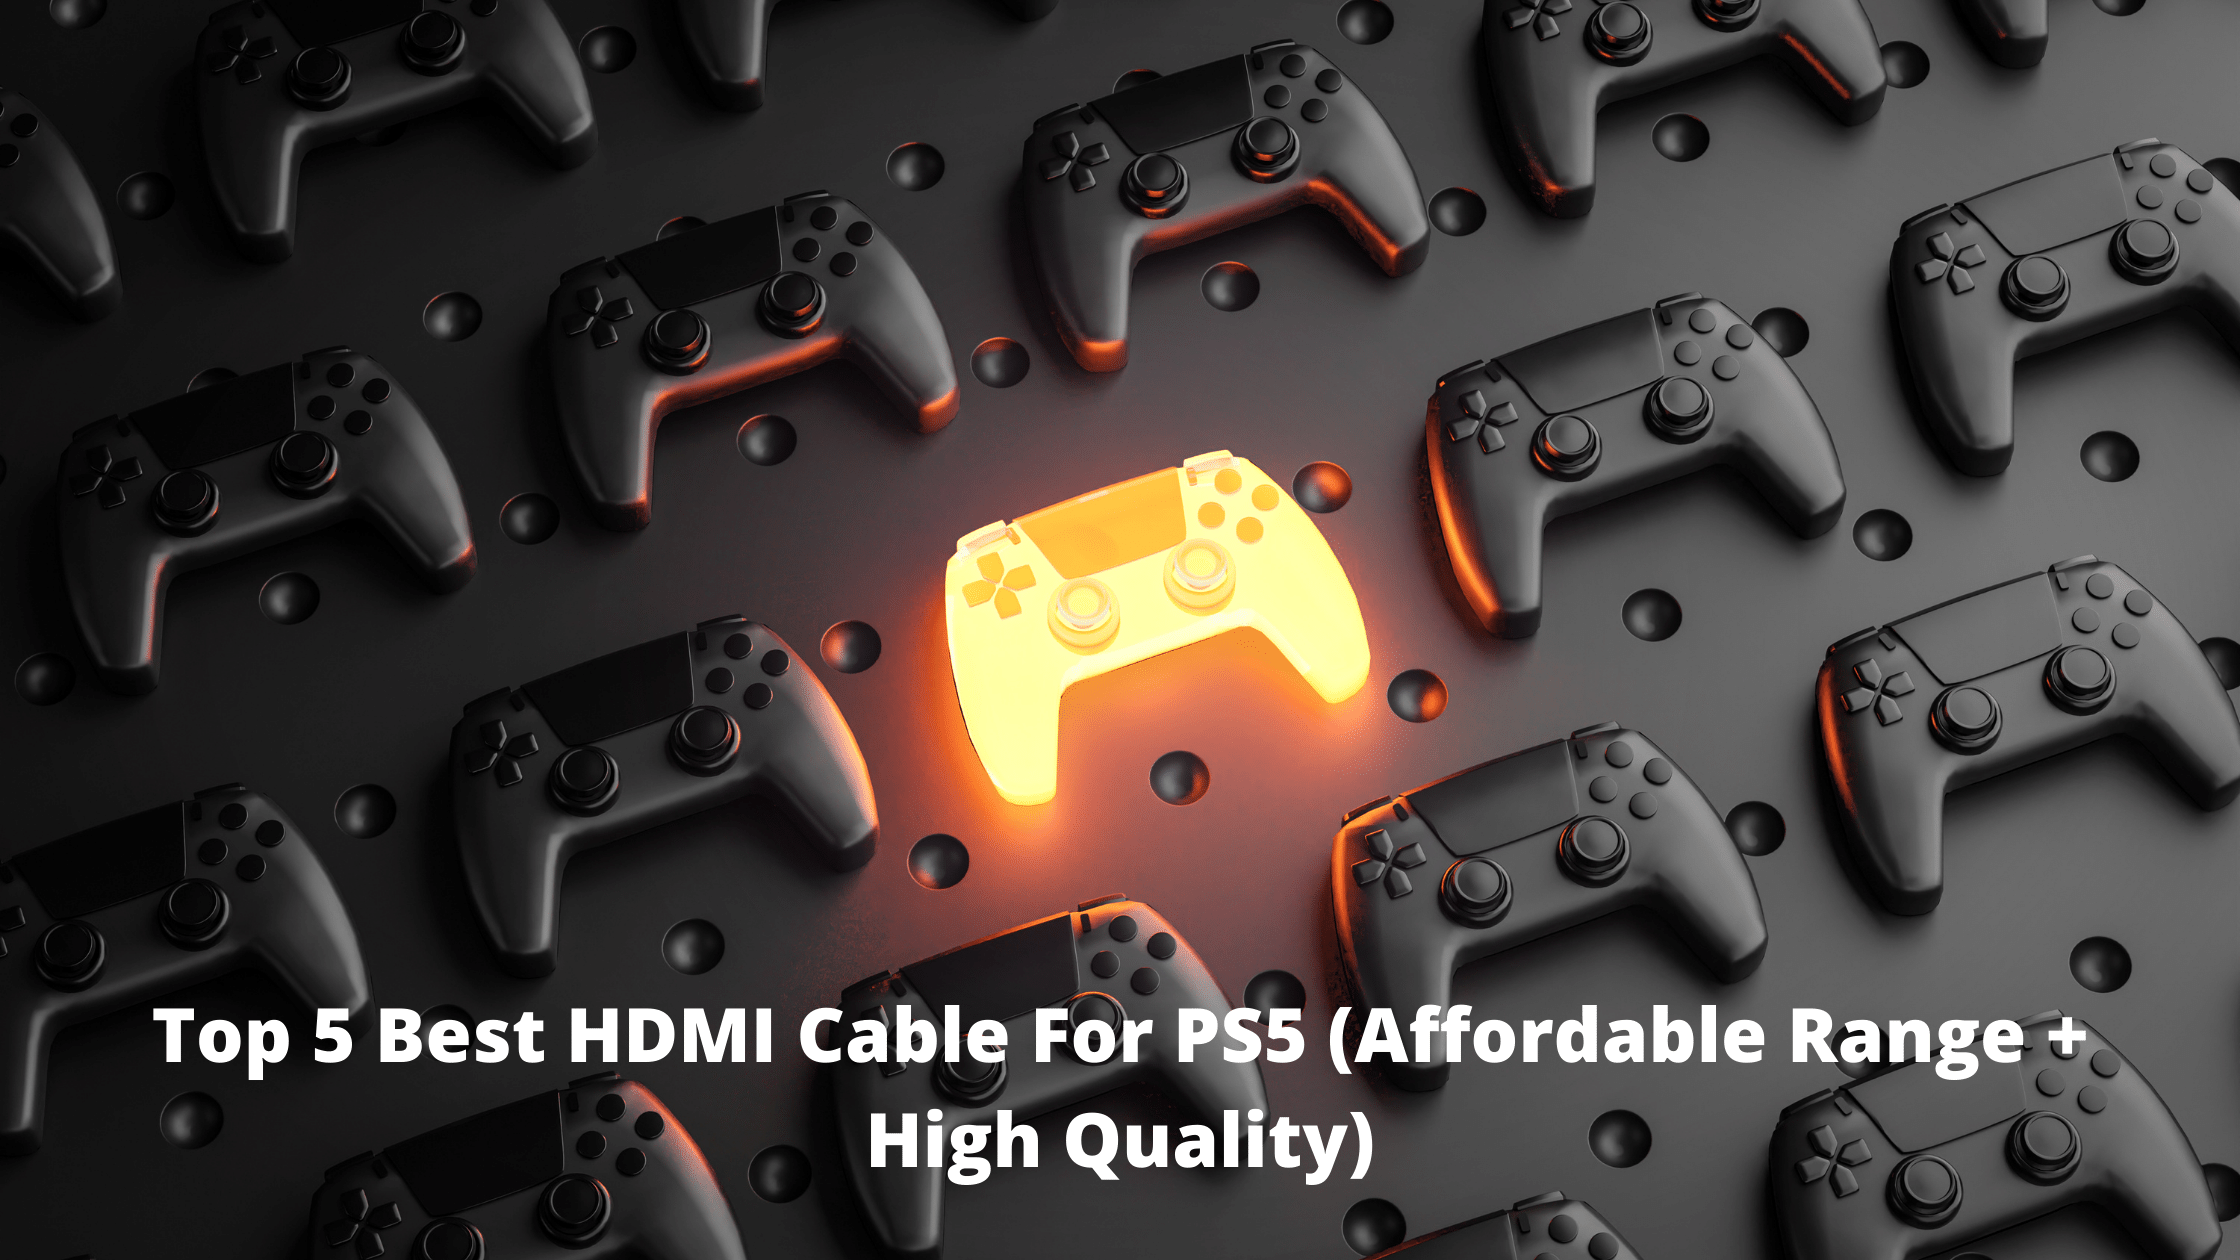 Top 5 Best HDMI Cable For PS5 (Affordable Range + High Quality)